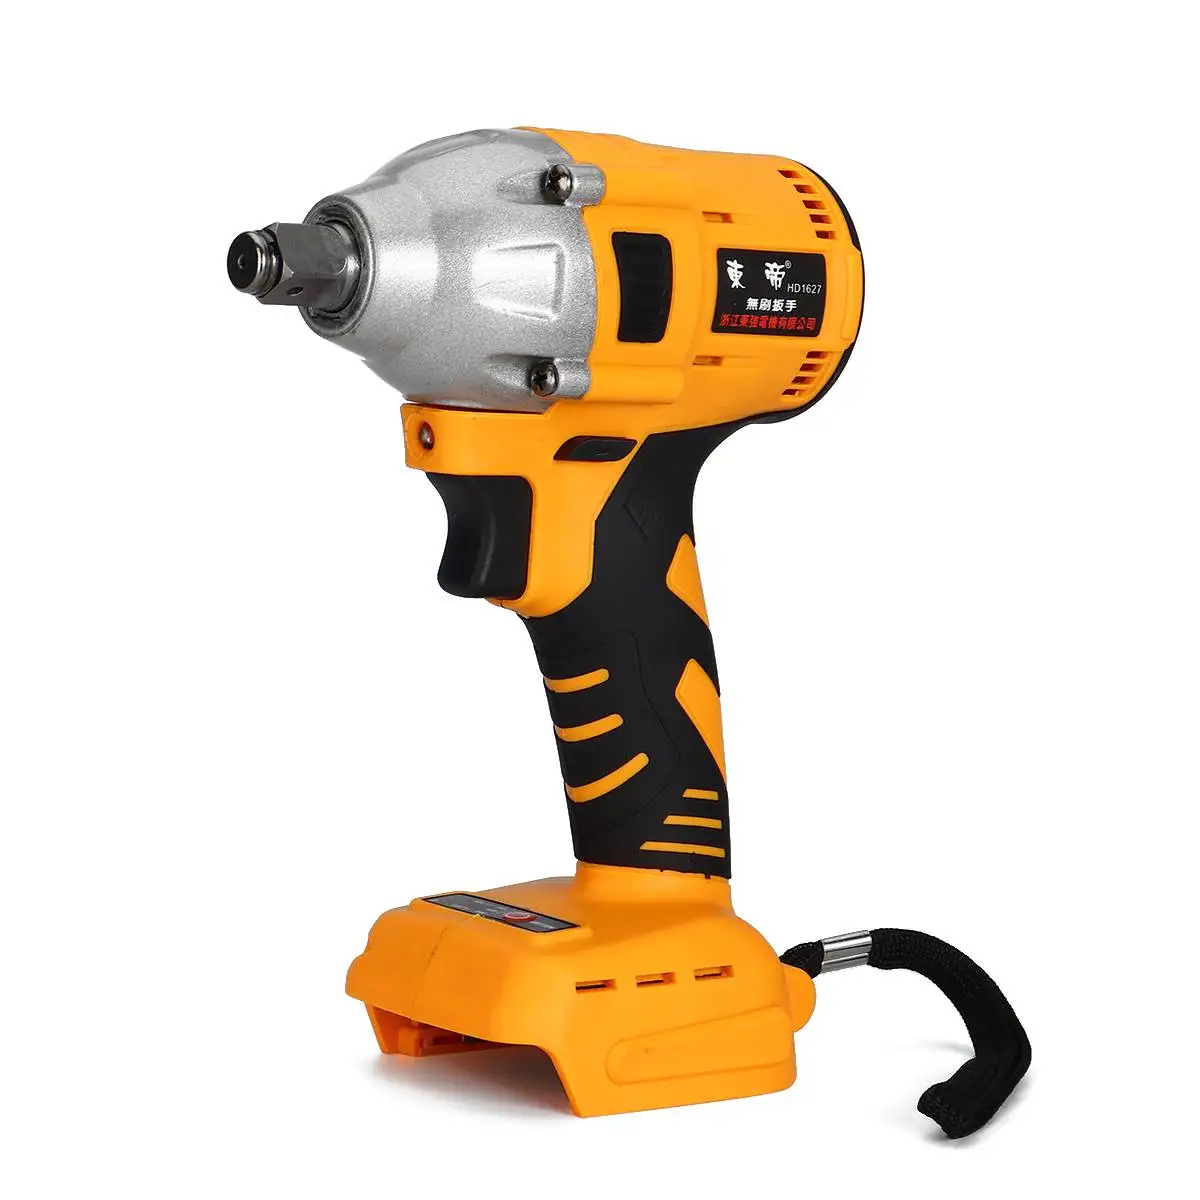 

18V Cordless Brushless Impact Electric Wrench Screwdriver Stepless Speed Change Switch For 18V Makiita Battery